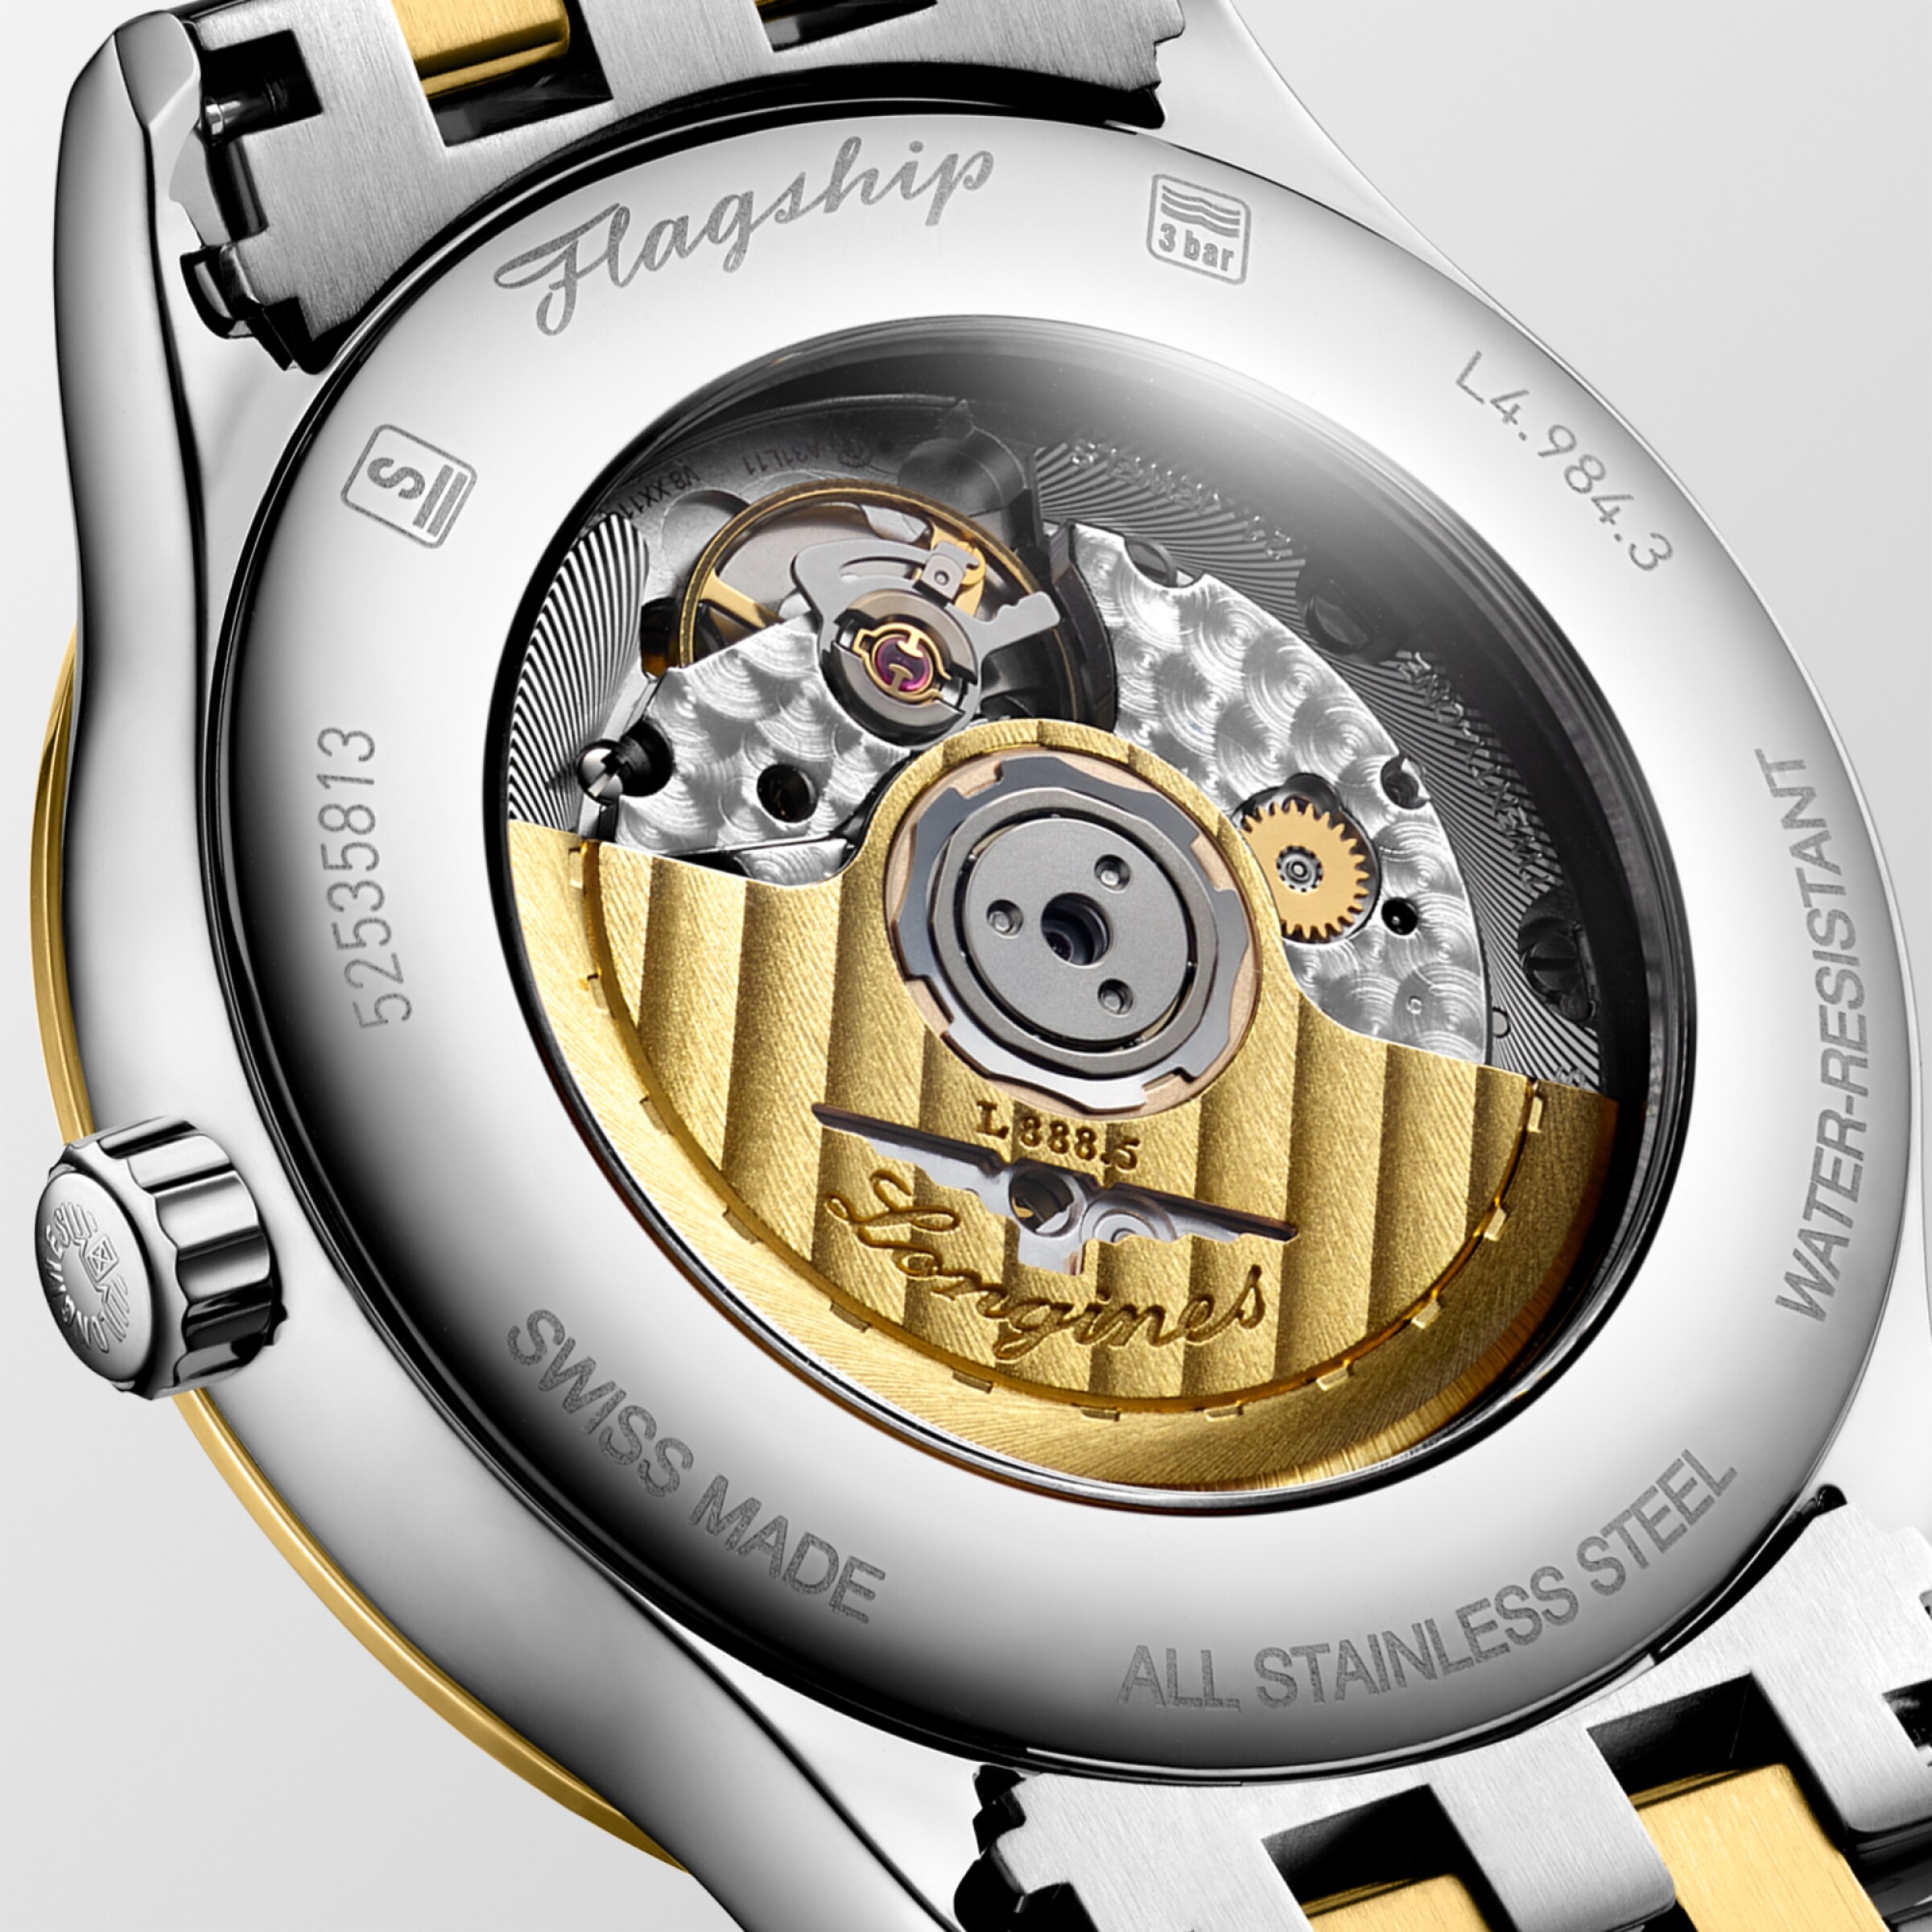 Longines FLAGSHIP Automatic Stainless steel and yellow PVD coating Watch - L4.984.3.32.7